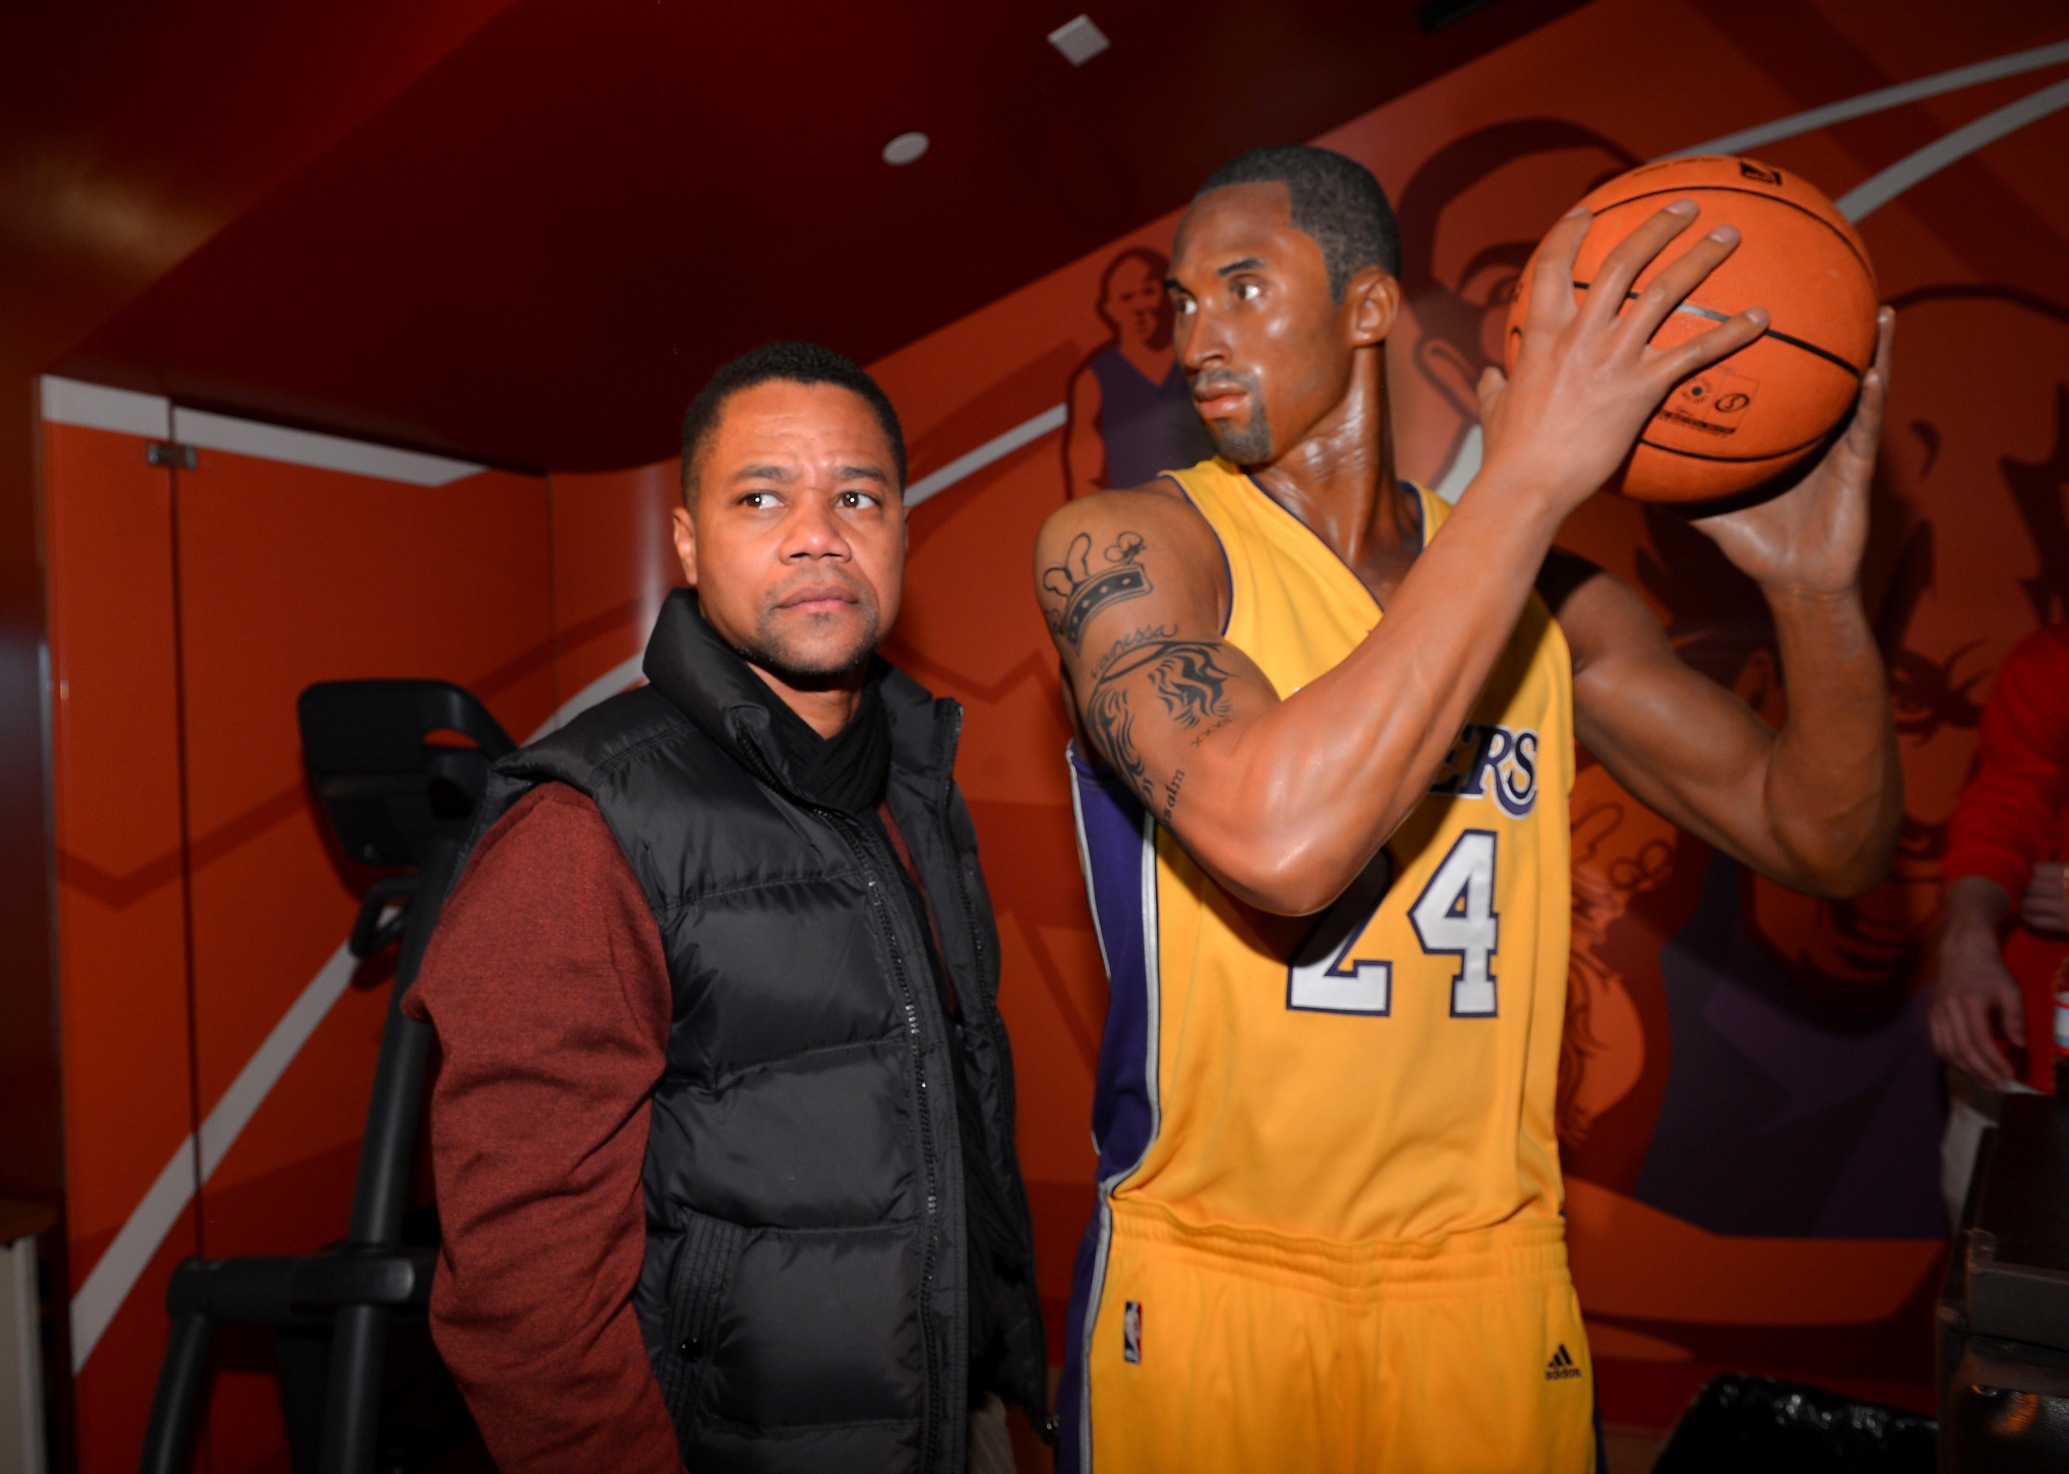 HOLLYWOOD, CA - JANUARY 23:  Actor Cuba Gooding Jr. (L) poses next to a wax figure of NBA player Kobe Bryant as he attends Relativity Media's "Movie 43" Los Angeles Premiere After Party on January 23, 2013 in Hollywood, California.  (Photo by Alberto E. Rodriguez/Getty Images For Relativity Media)